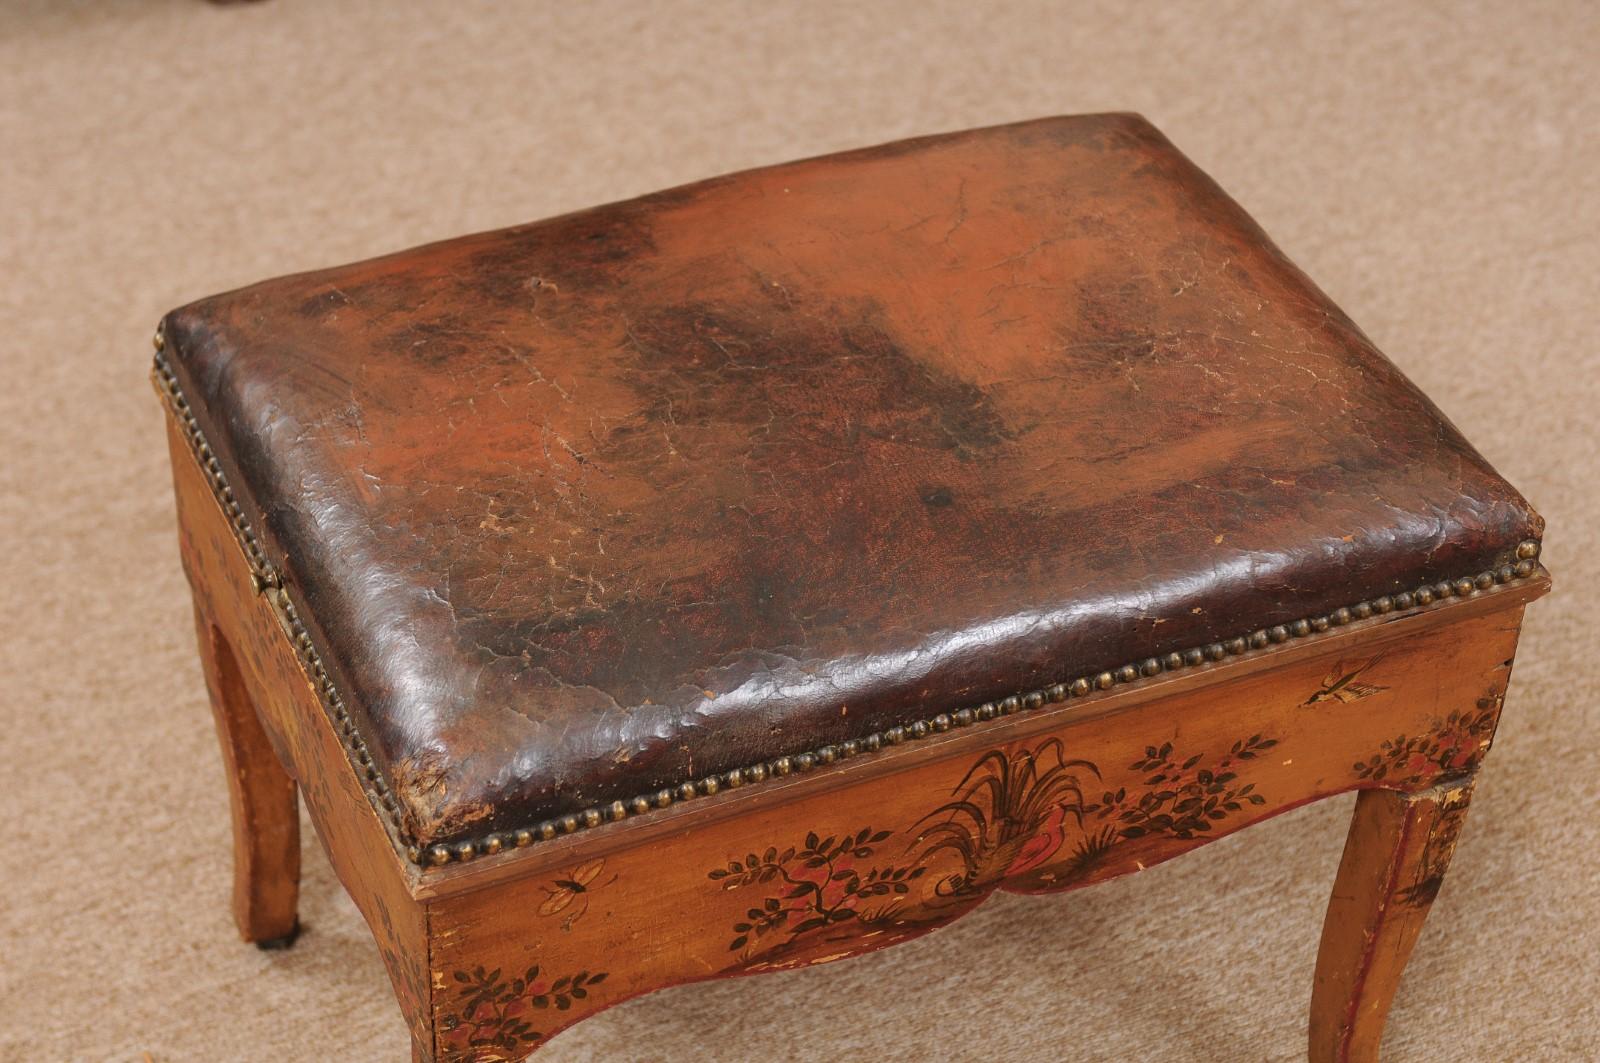 18th Century Italian Stool with Painted Decoration & Leather Upholstered Seat 6